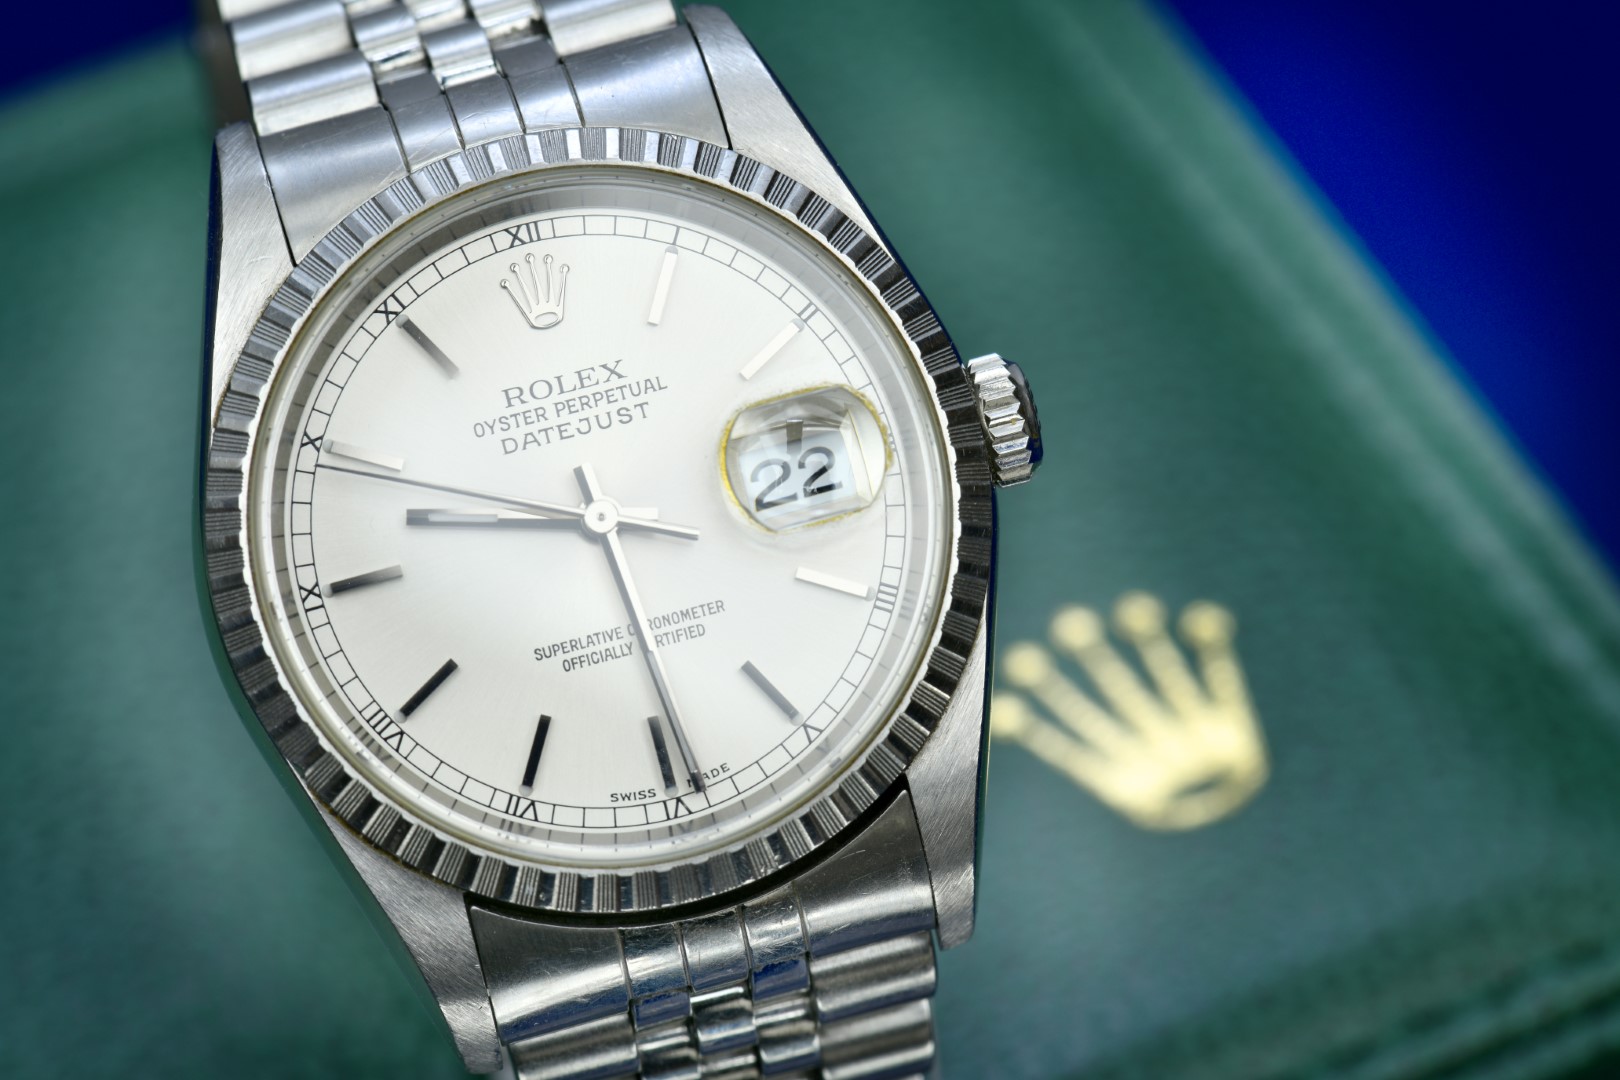 Rolex Oyster Perpetual Datejust gentleman's wristwatch ref. 16220 with date aperture, luminous - Image 4 of 12